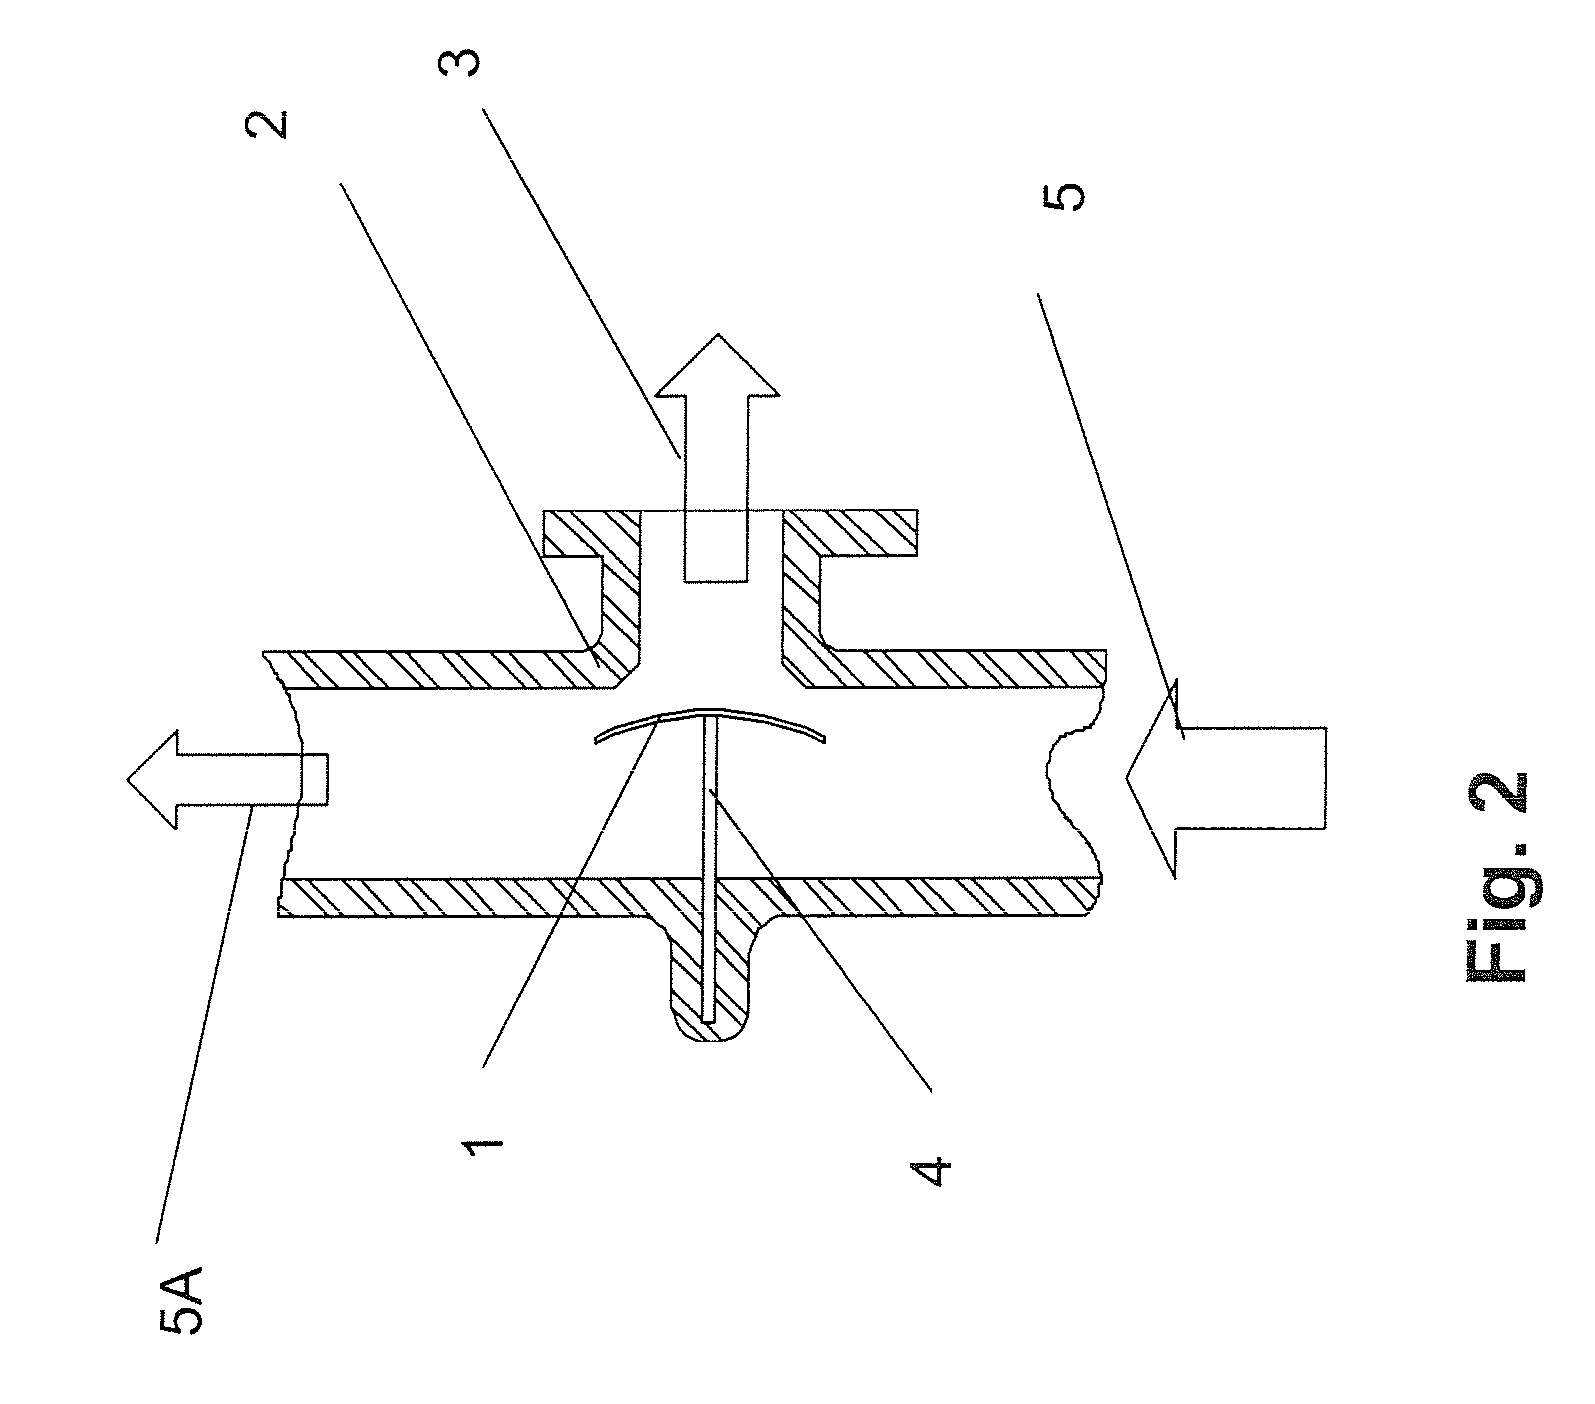 Thermatically operated bypass valve for passive warmup control of aftertreatment device